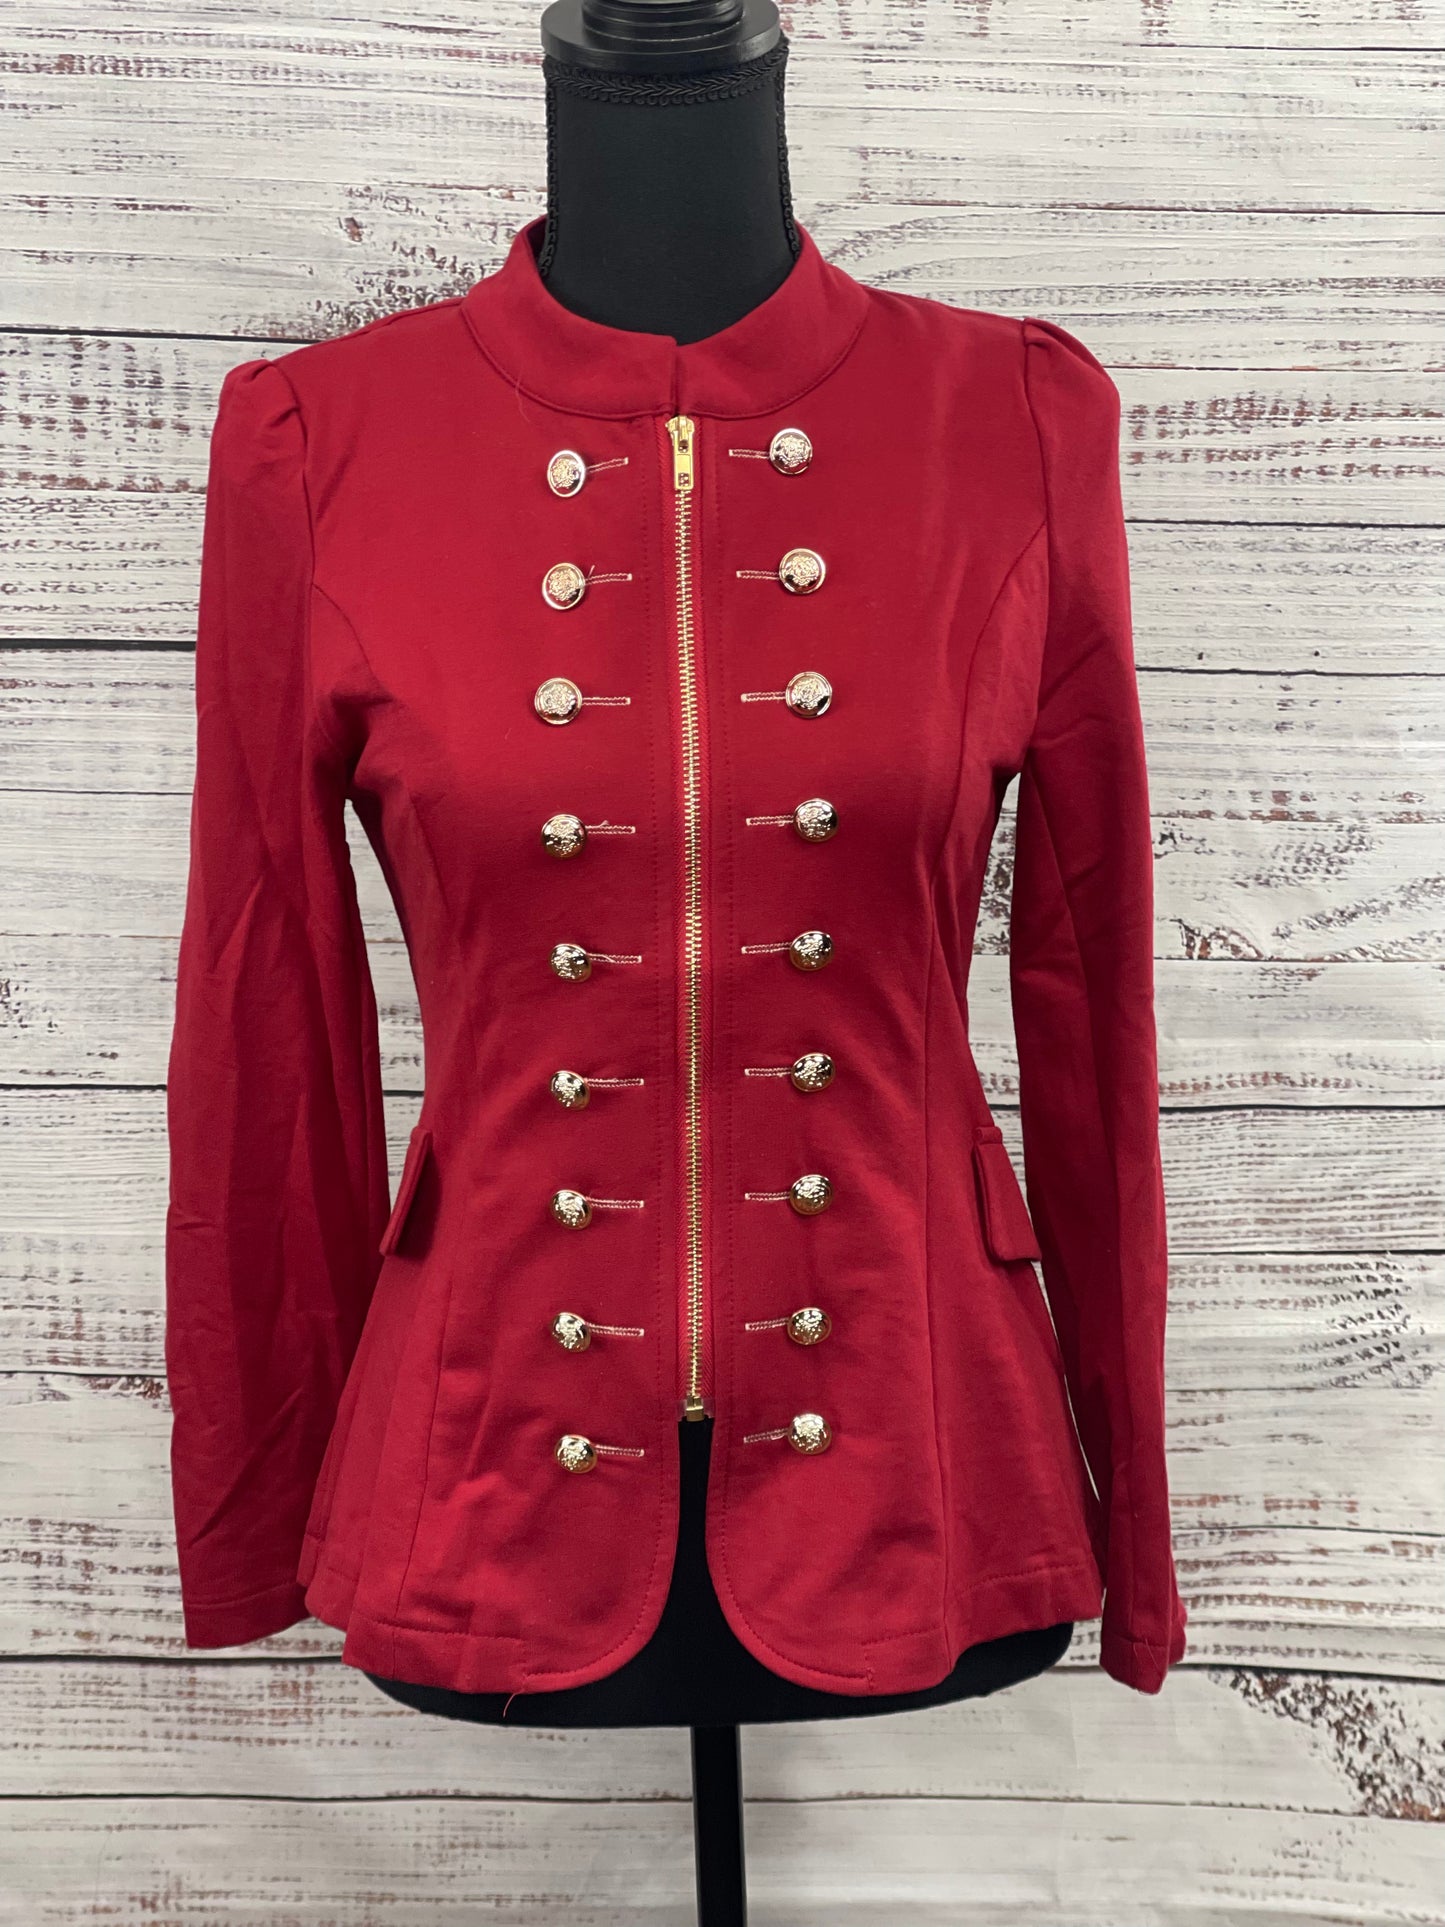 Hearts and Roses Burgundy Jacket